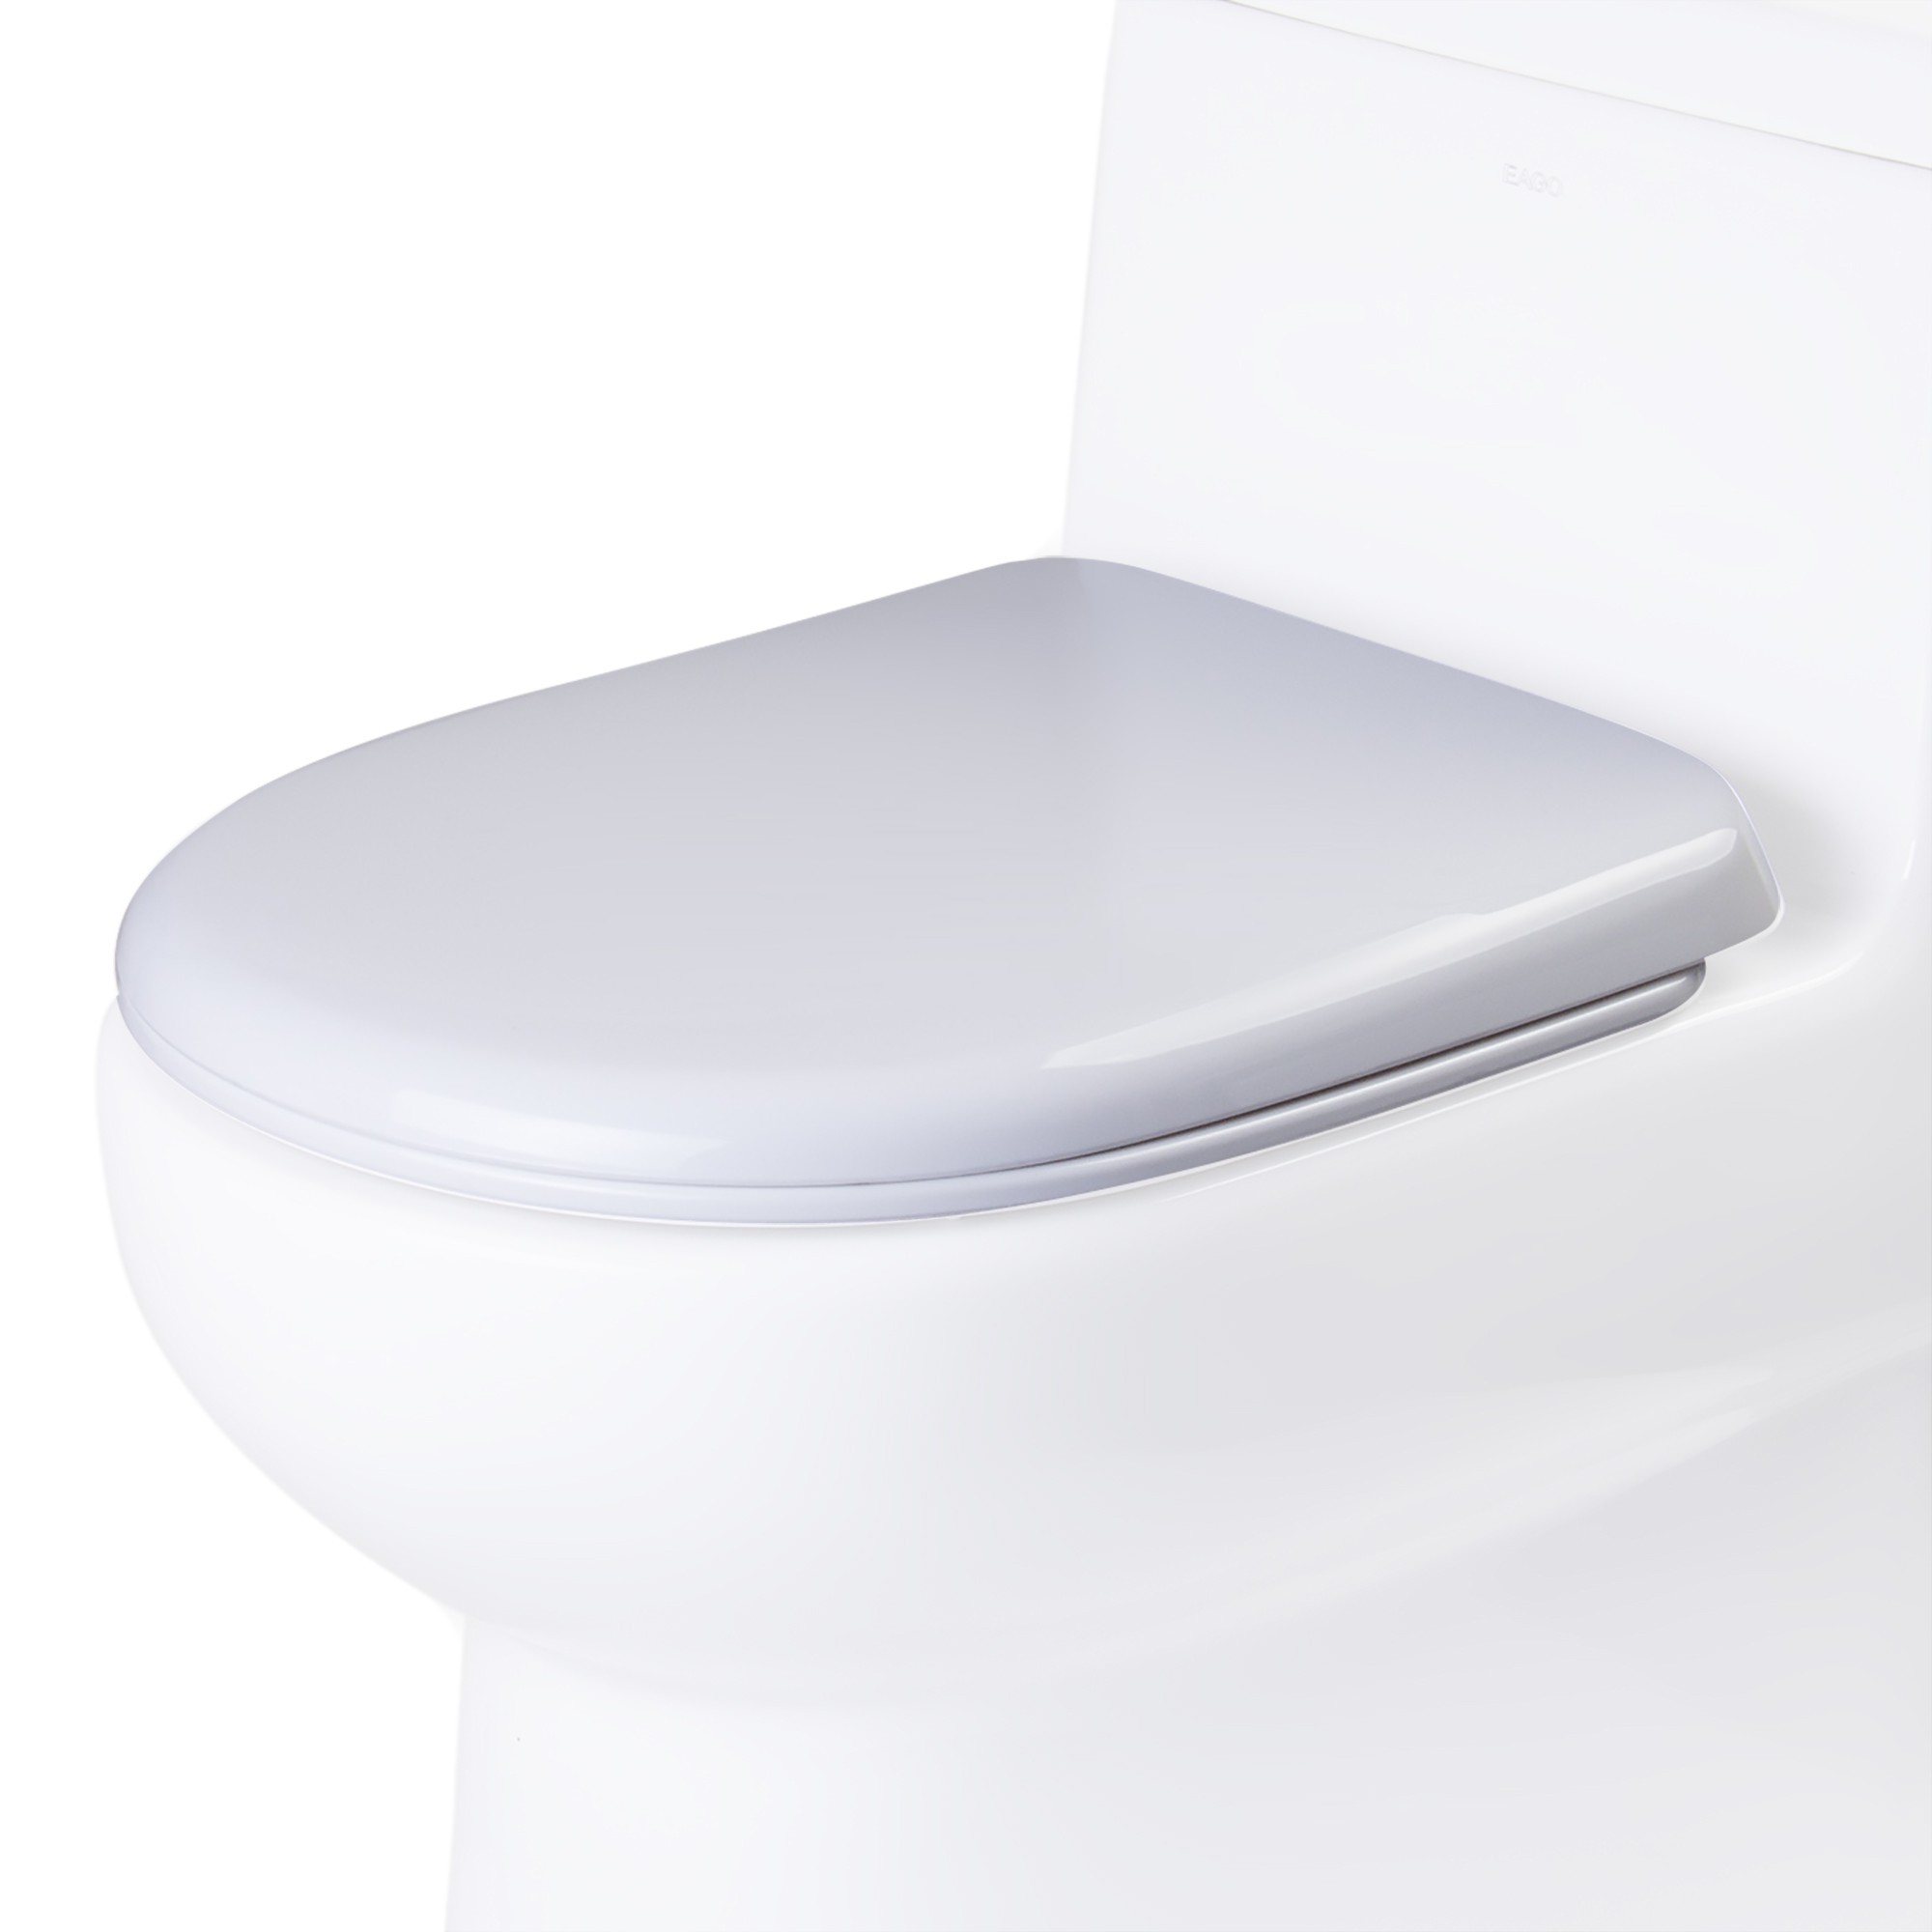 EAGO R-351SEAT Replacement Soft Closing Toilet Seat for TB351